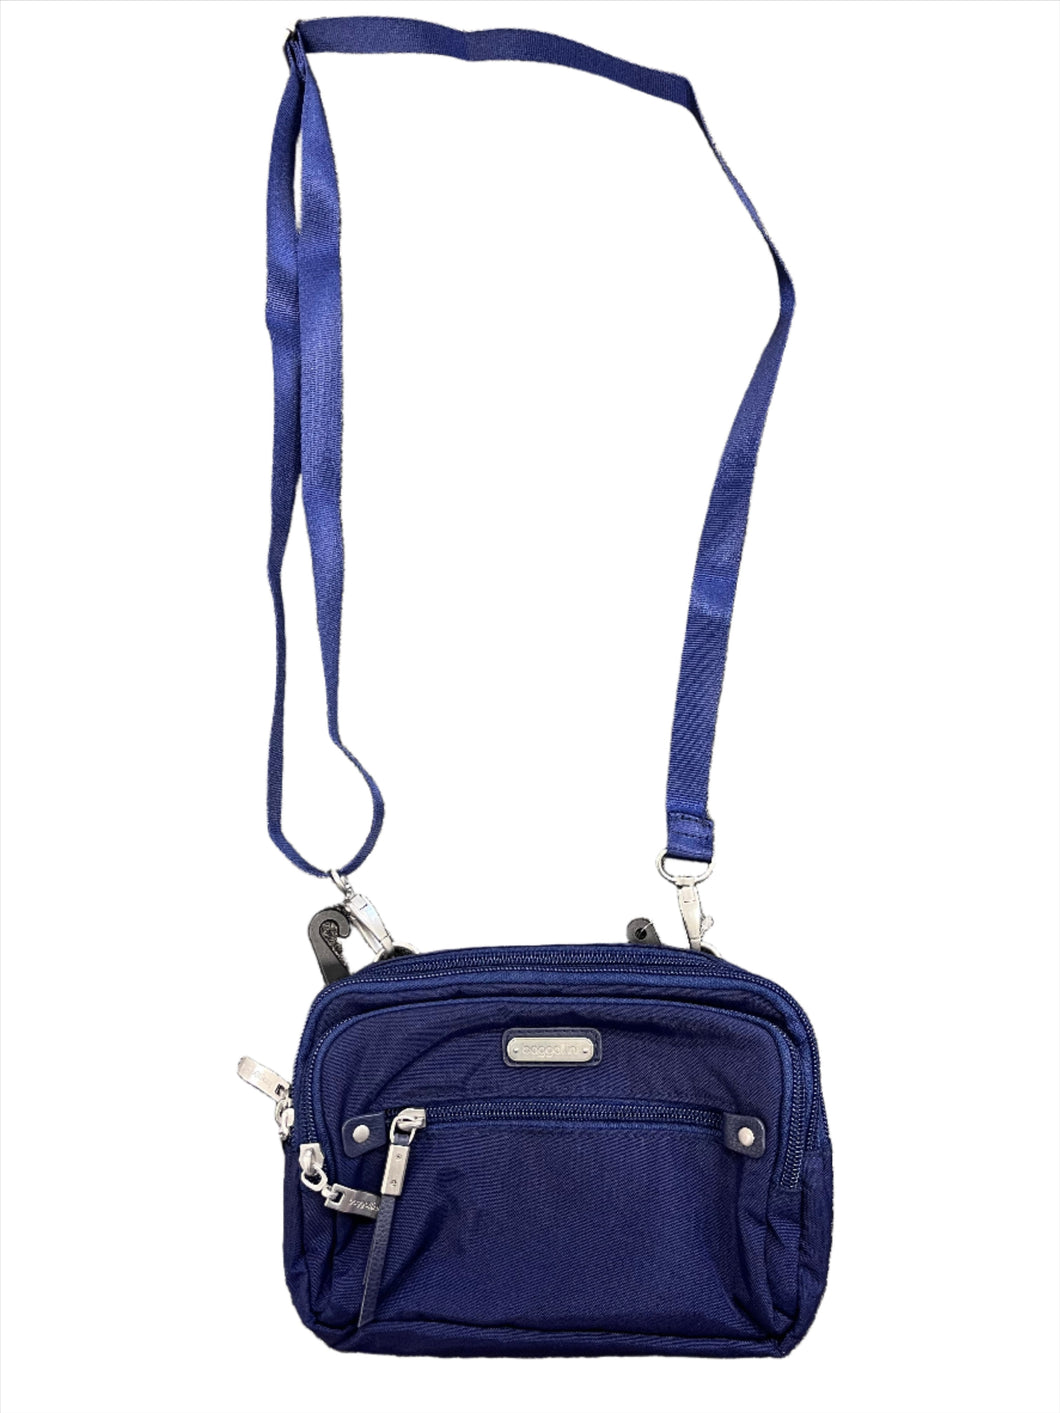 A Traveler's Friend Crossbody and Belt Bag By Baggallini